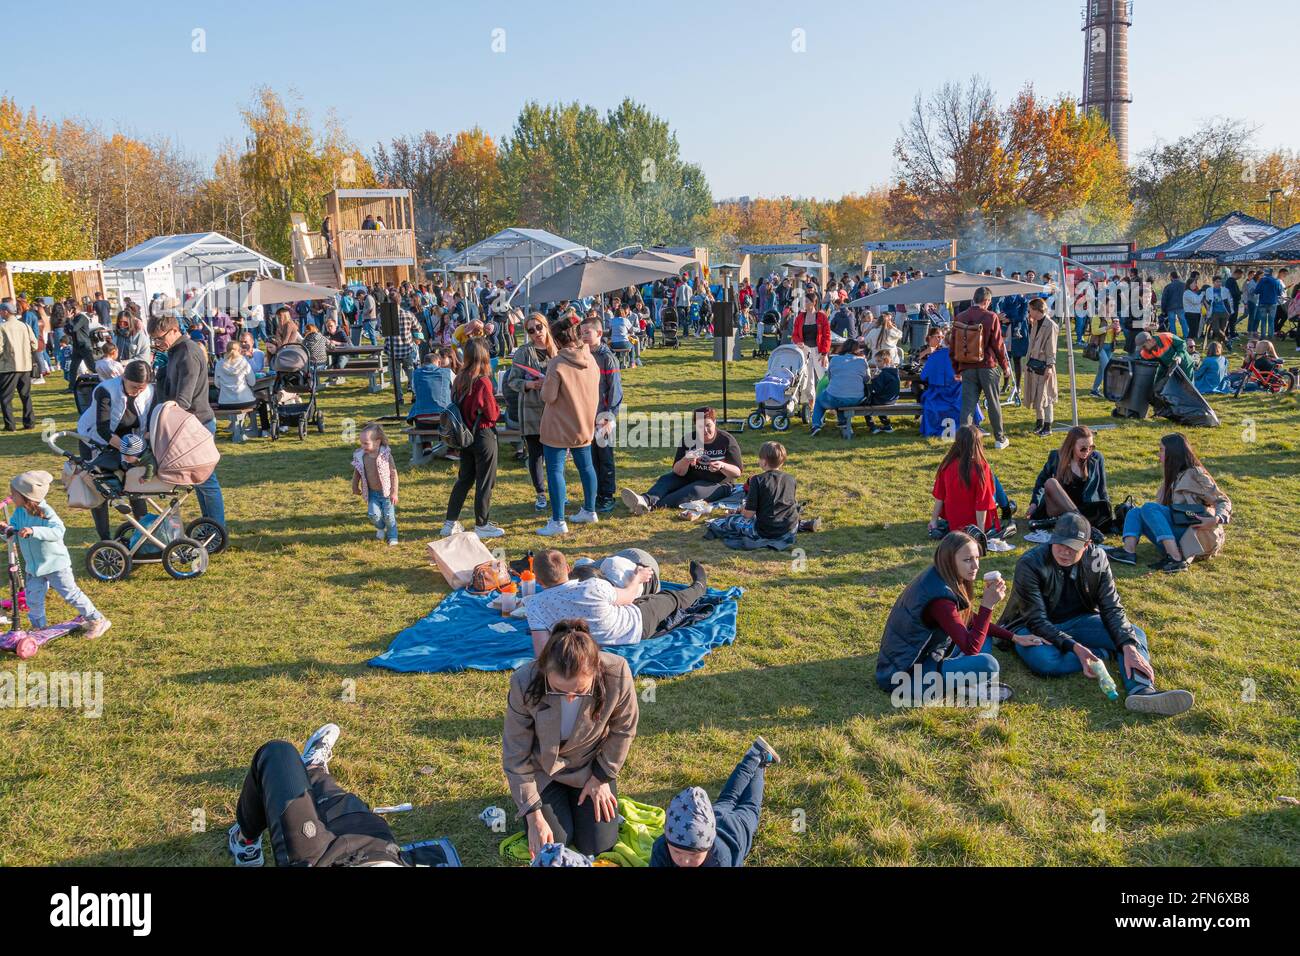 Kazan, Russia - October 03, 2020: Residents relax, sit and lie on the lawn in the city park, around which there are many mobile barbecue restaurants. Stock Photo